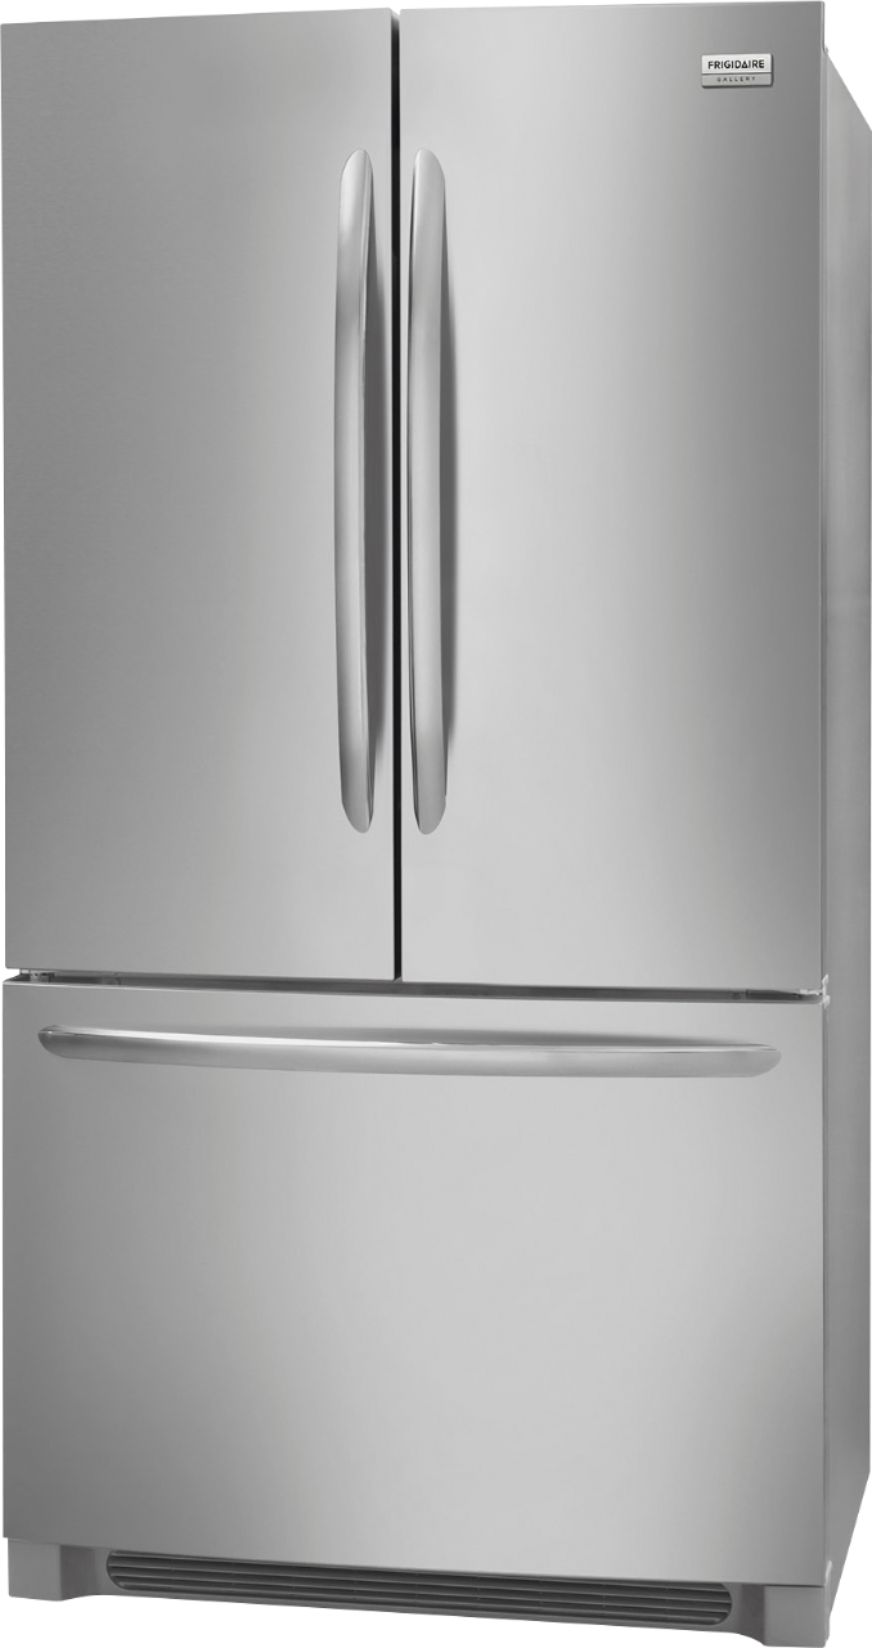 Left View: Frigidaire - Gallery 27.6 Cu. Ft. French Door Refrigerator - Stainless steel